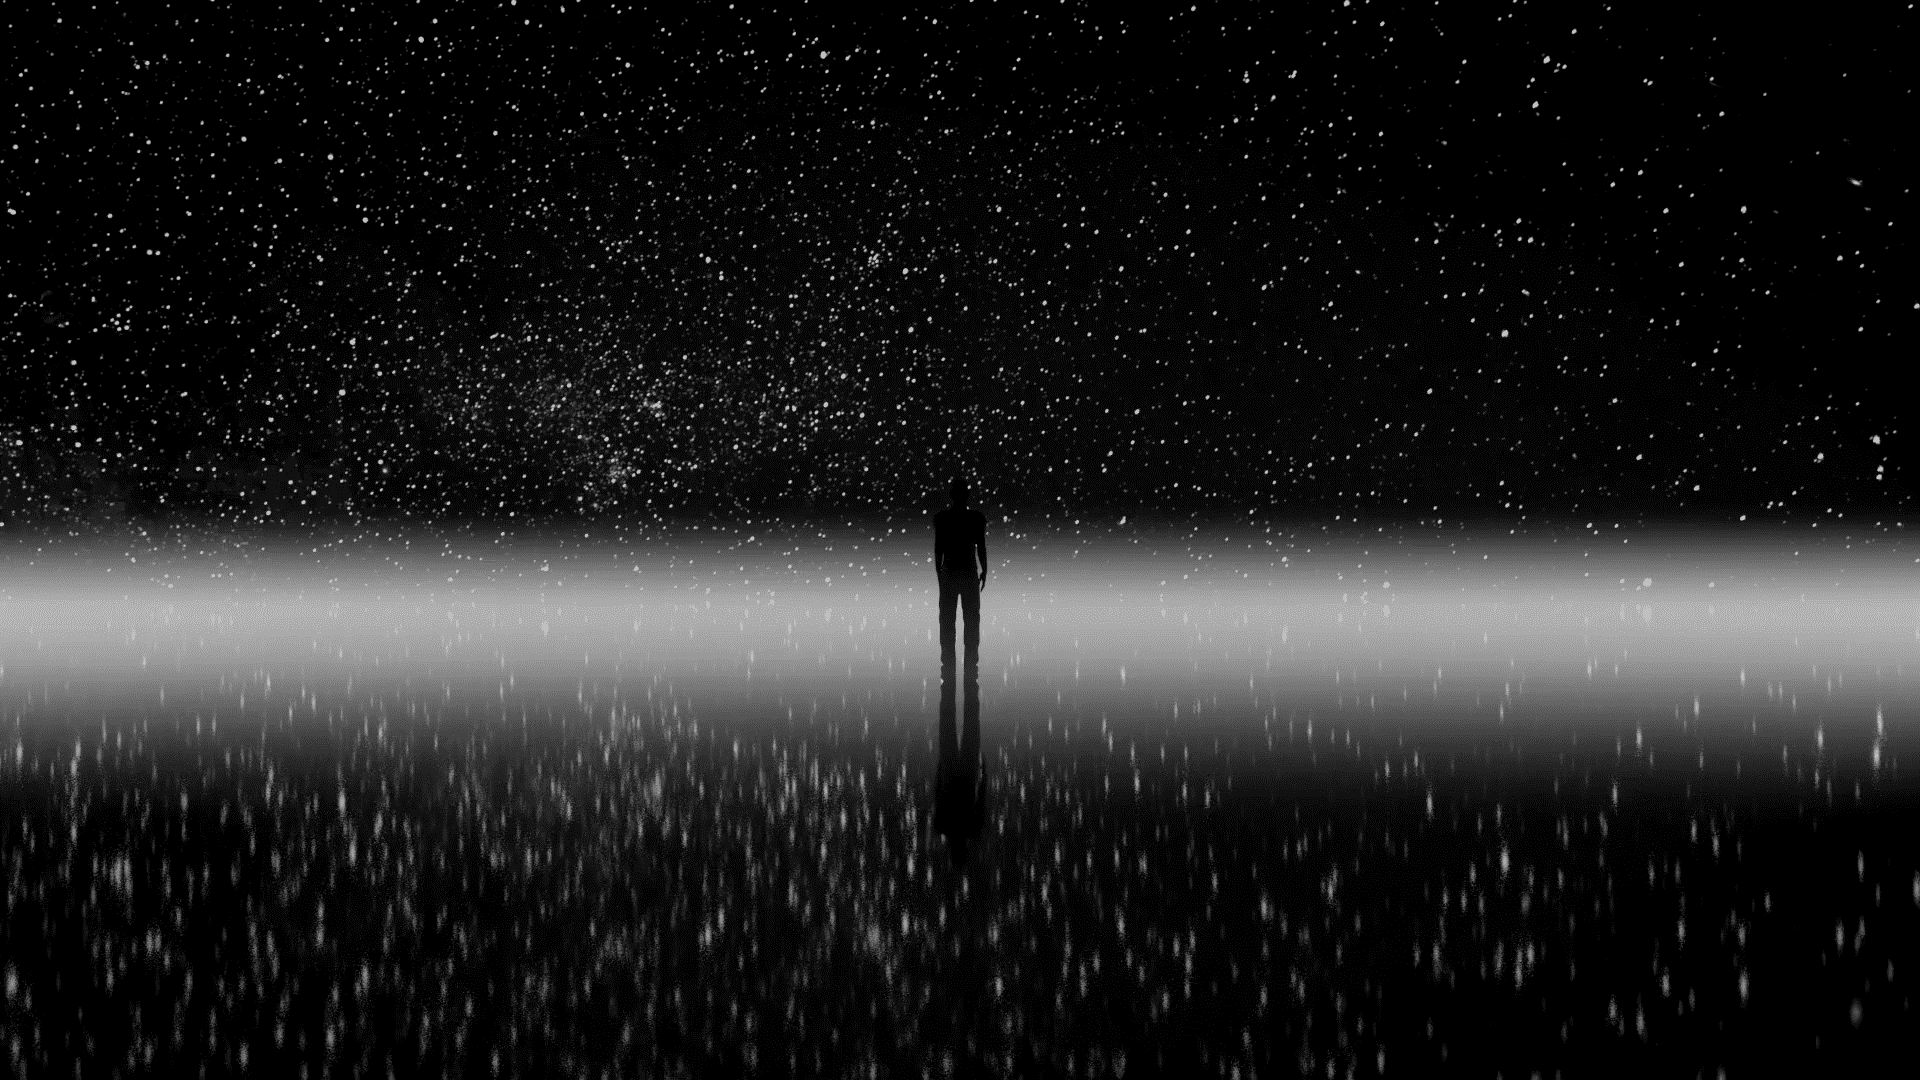 Black and white photo of person with background looking like stars in the sky